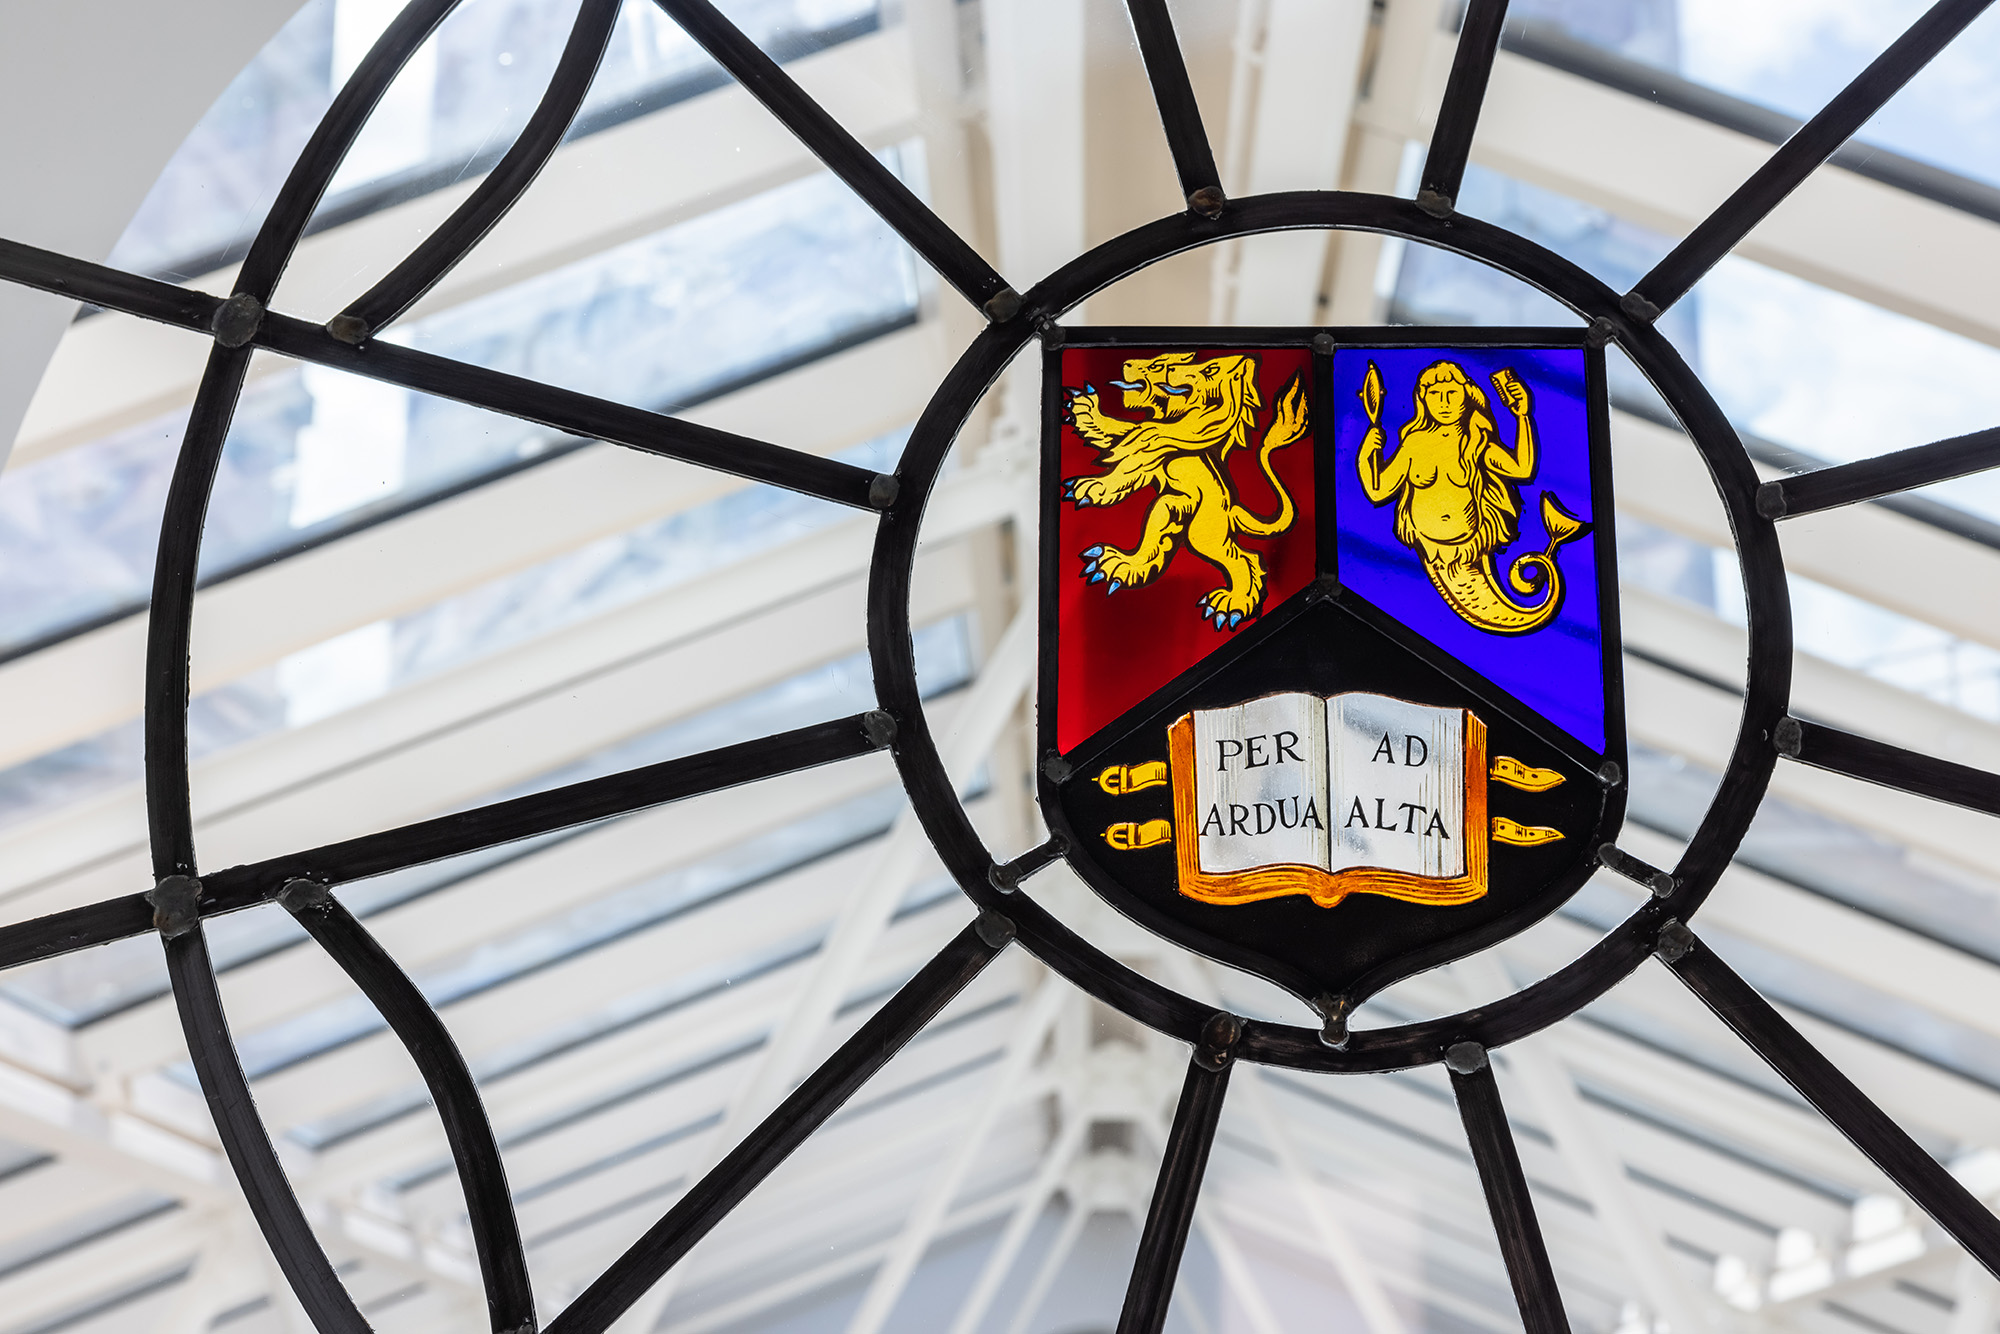 University crest in a stained glass window